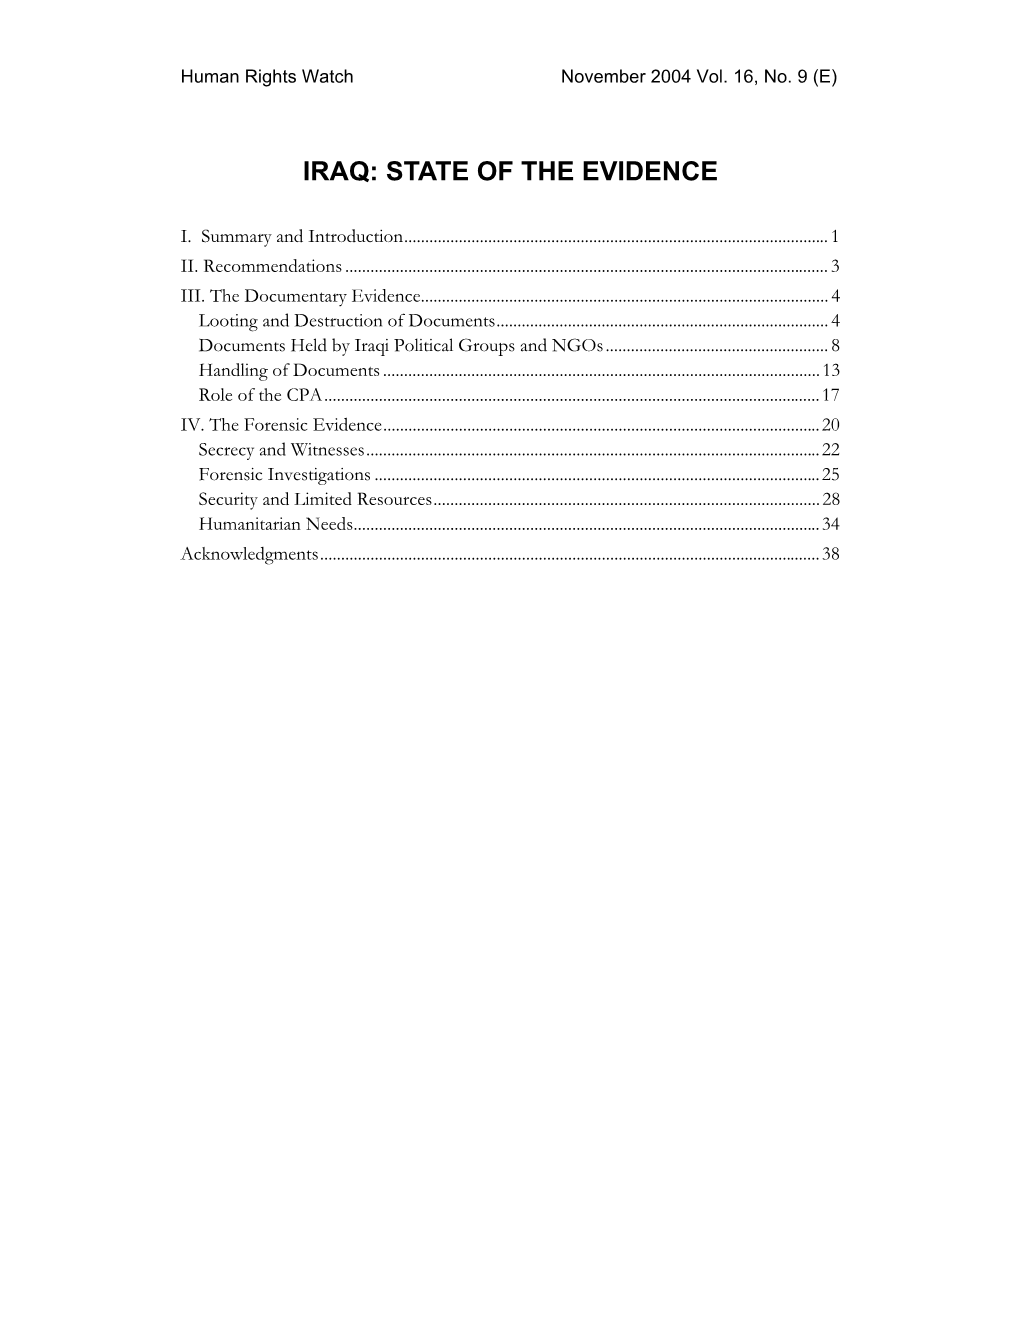 Iraq: State of the Evidence